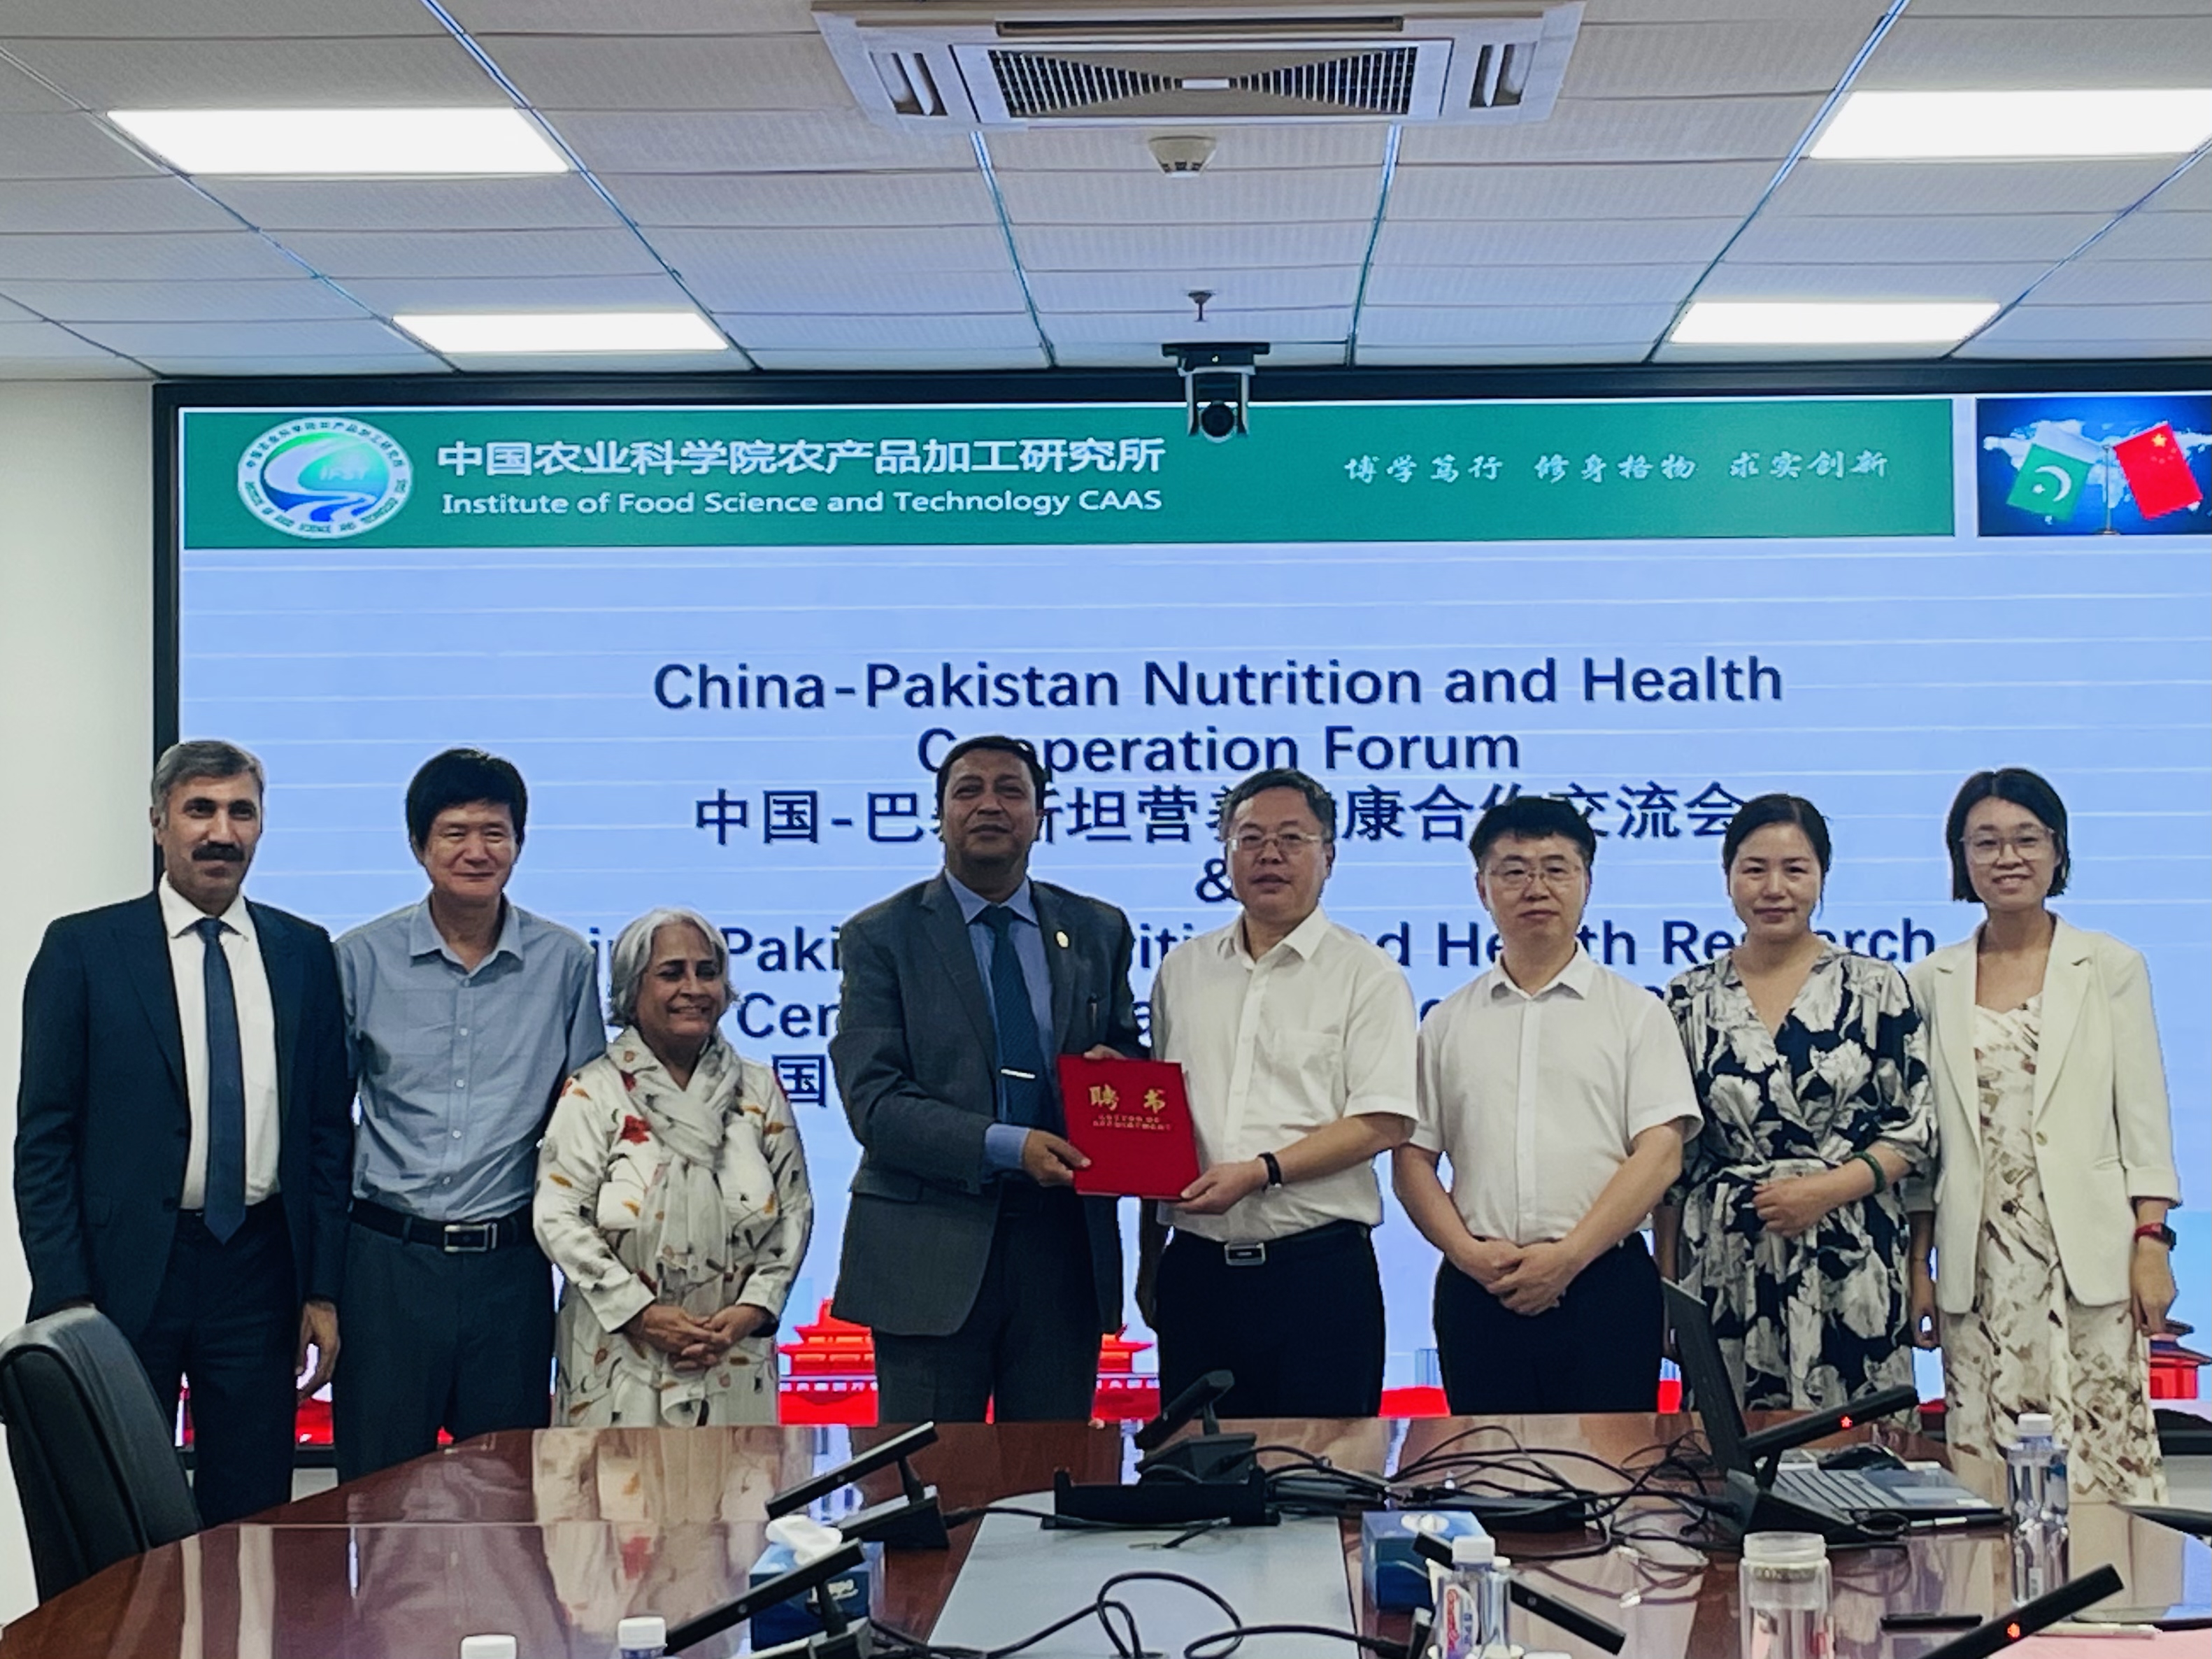 China-Pakistan cooperation in nutrition, health highlighted